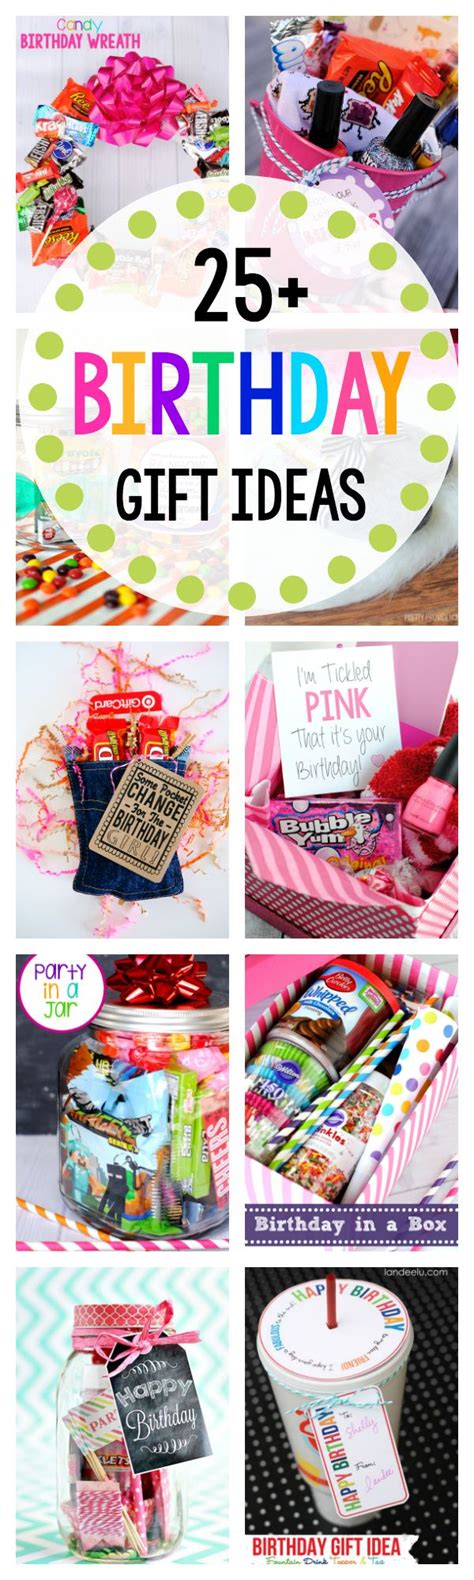 See more ideas about diy birthday gifts, diy birthday, diy birthday gifts for friends. 25 Fun Birthday Gifts Ideas for Friends | 25th birthday ...